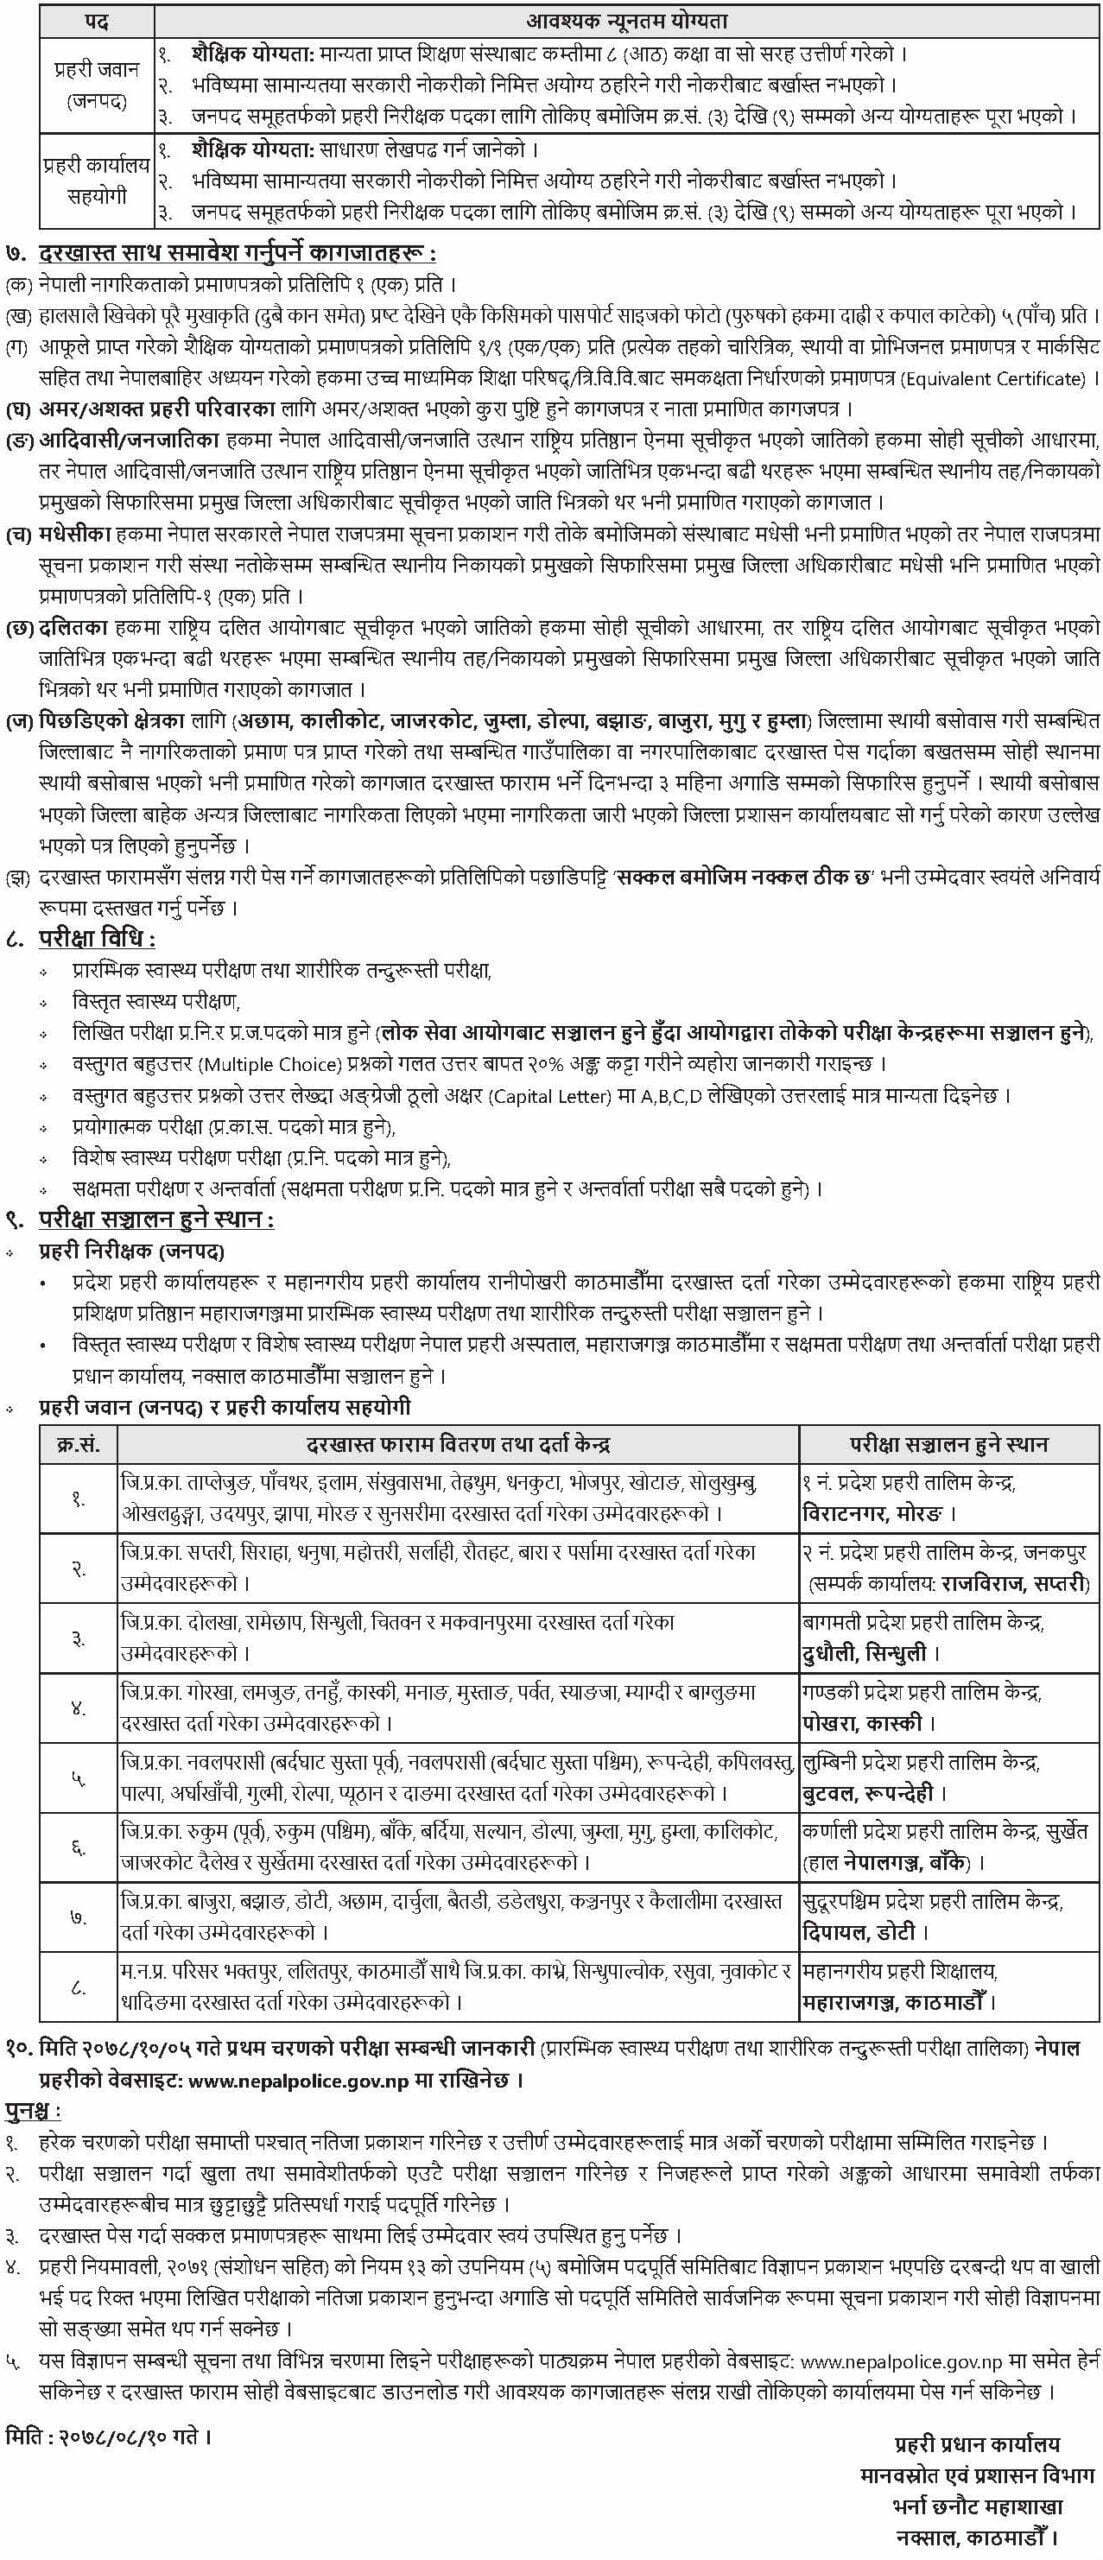 Nepal Police Vacancy | Jobs for 8 Class Passed in Nepal Police Janapad